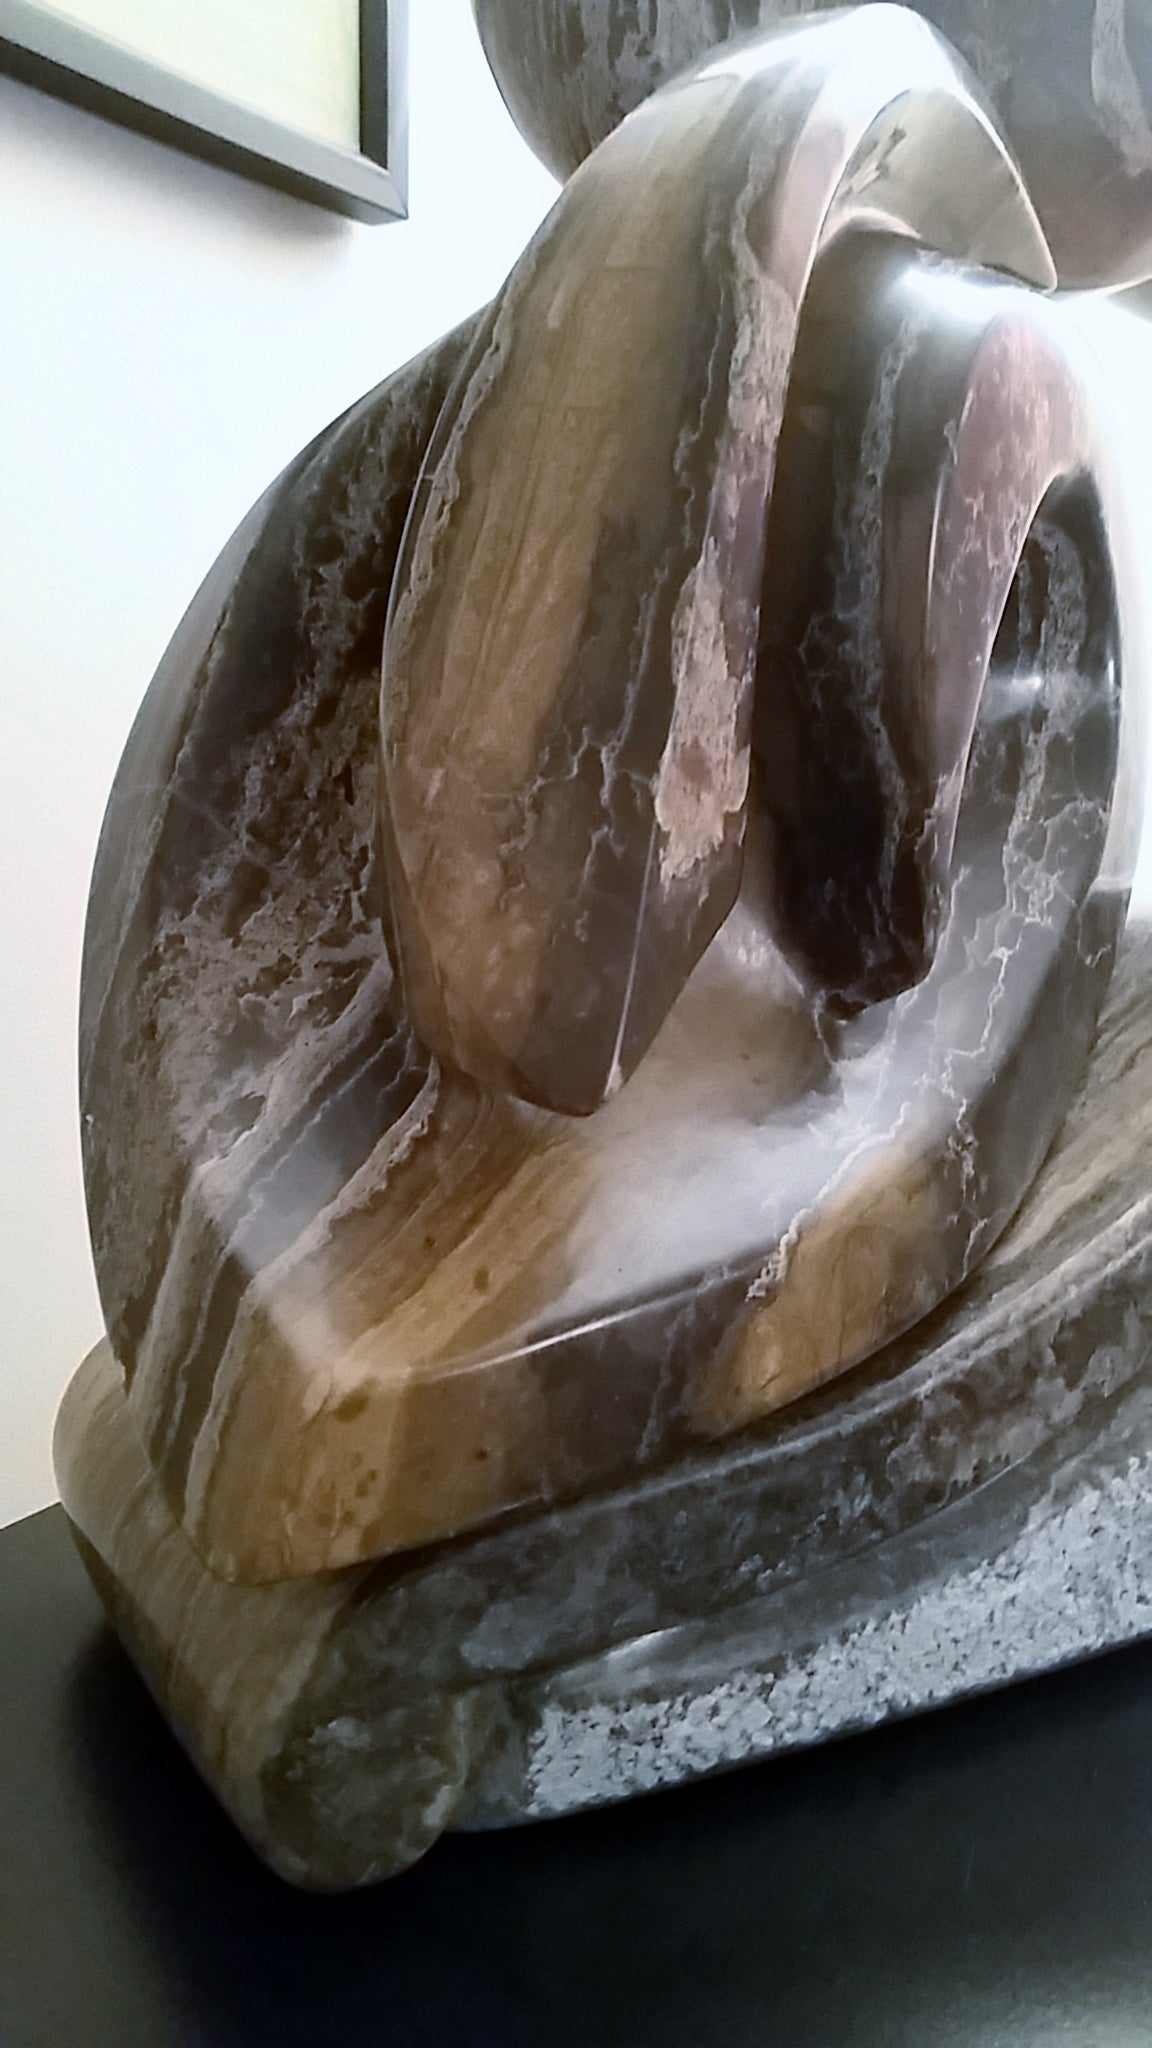 Sami Ben Lulu abstract marble sculpture.

Free shipping within the United States and Canada.